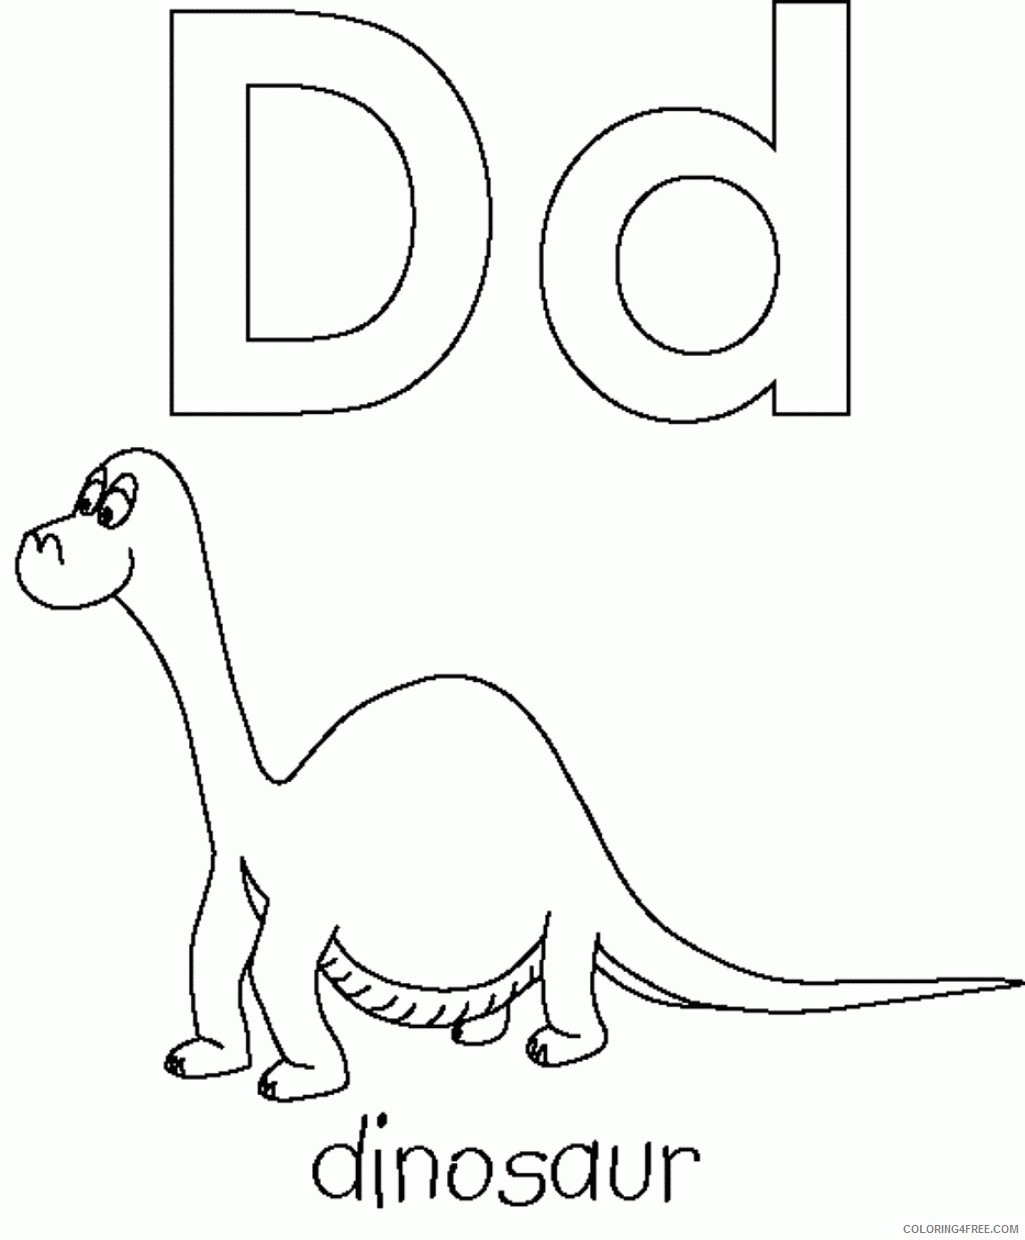 abc coloring pages d for dinosaur Coloring4free